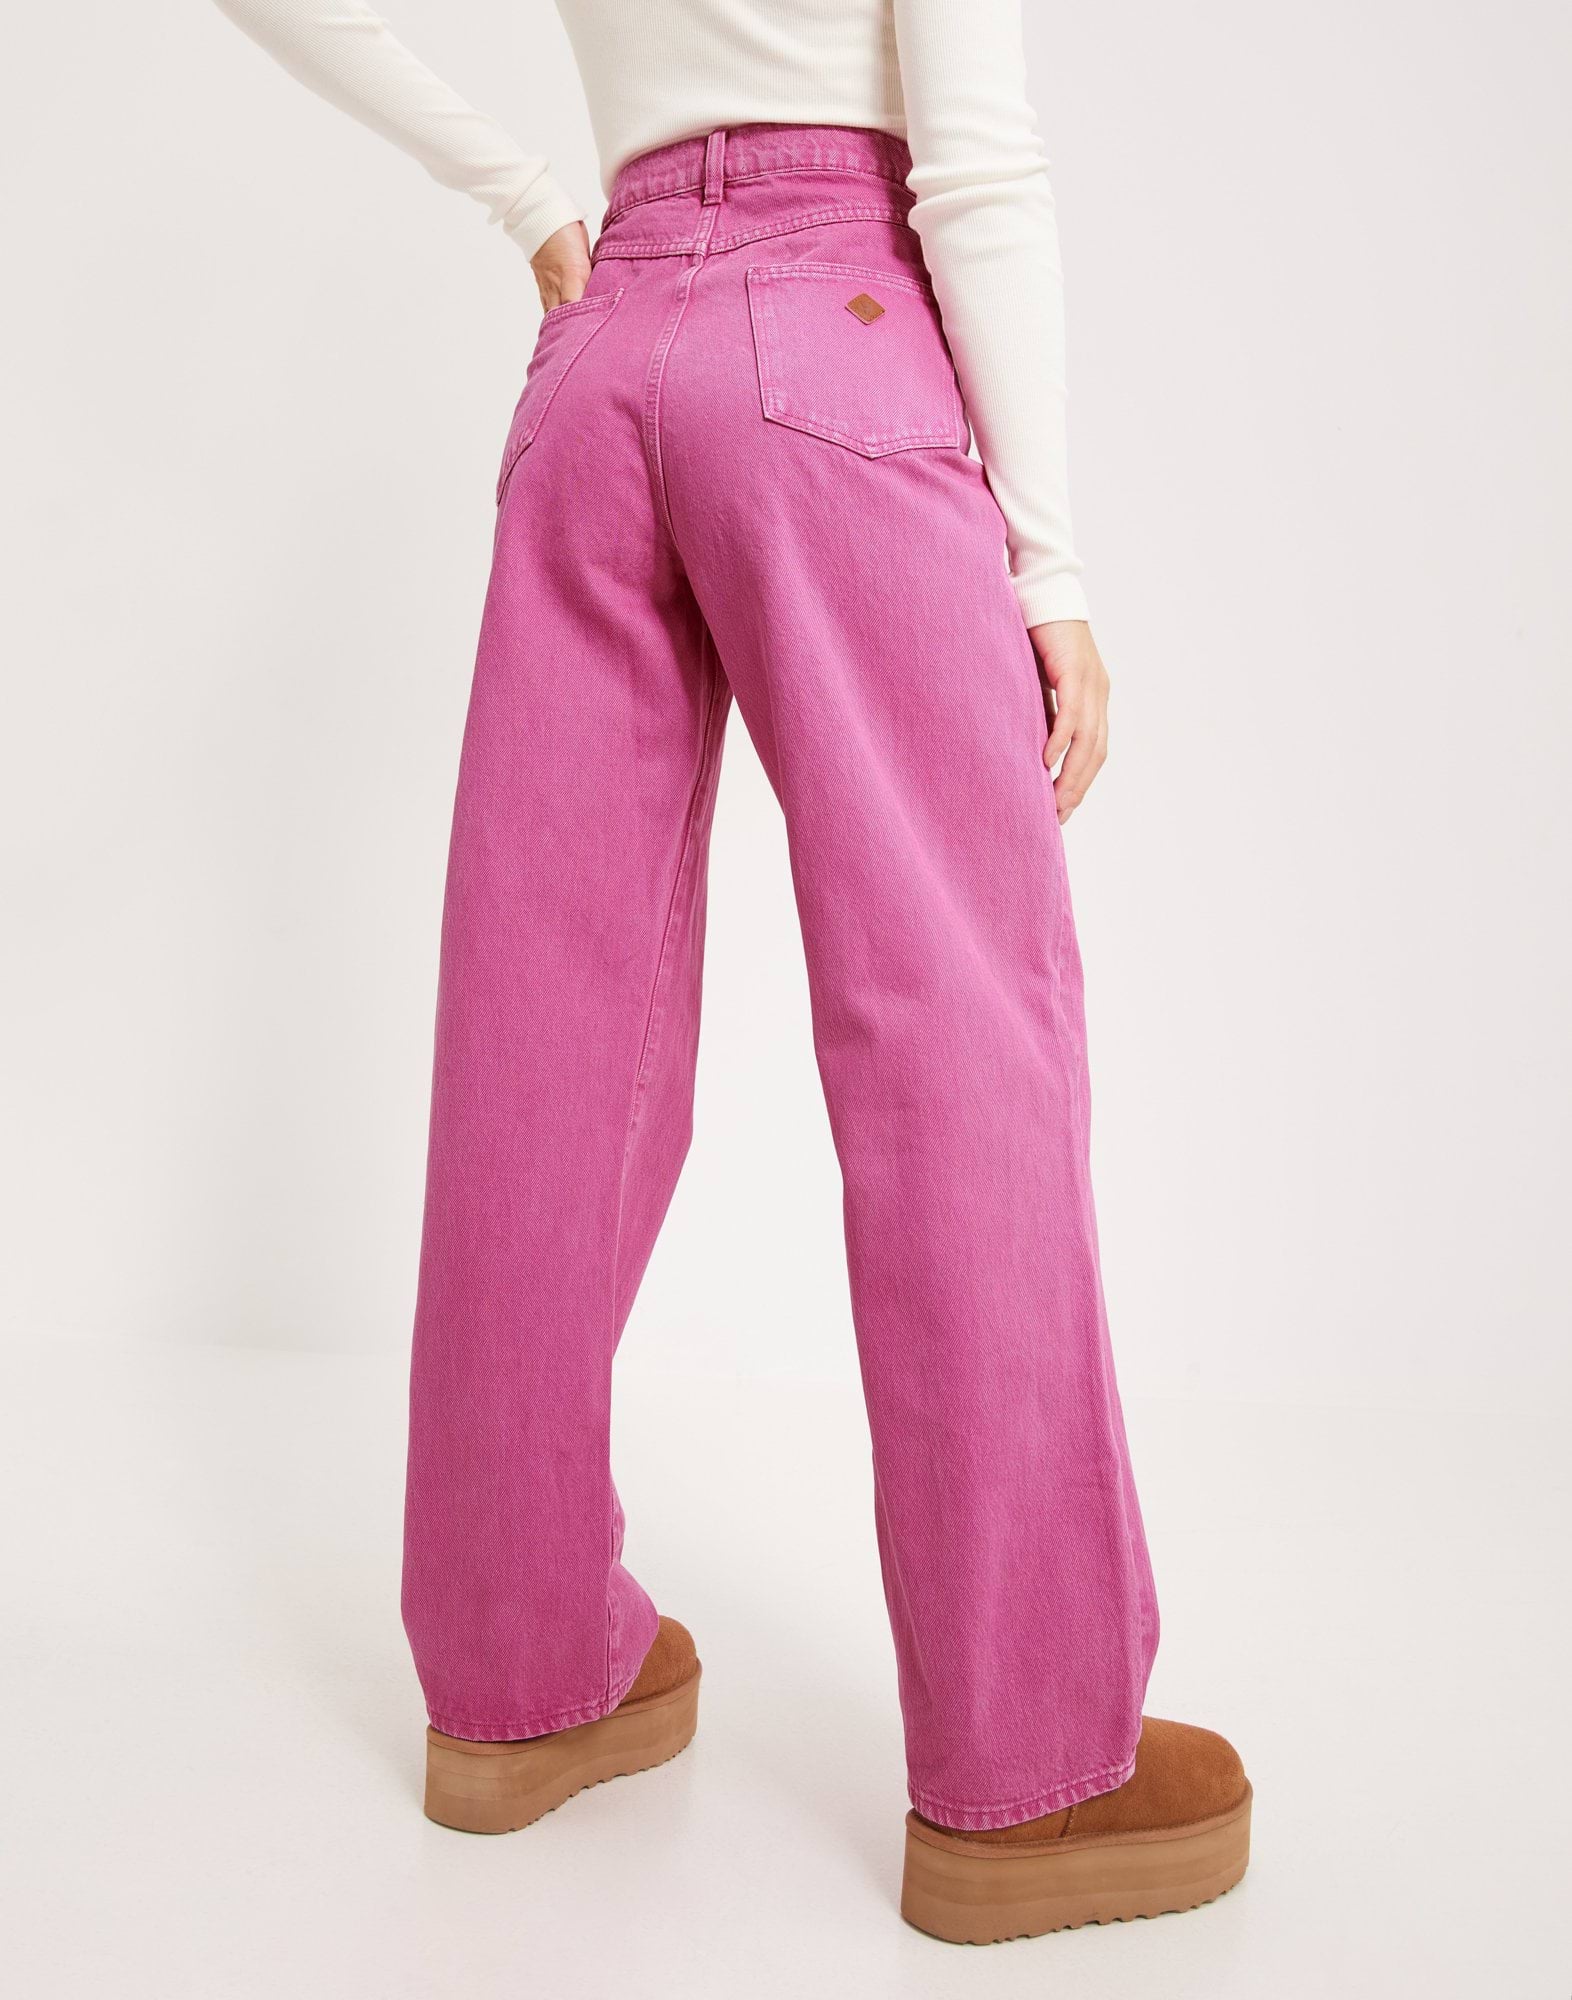 A SLOUCH JEANS SUPER PINK